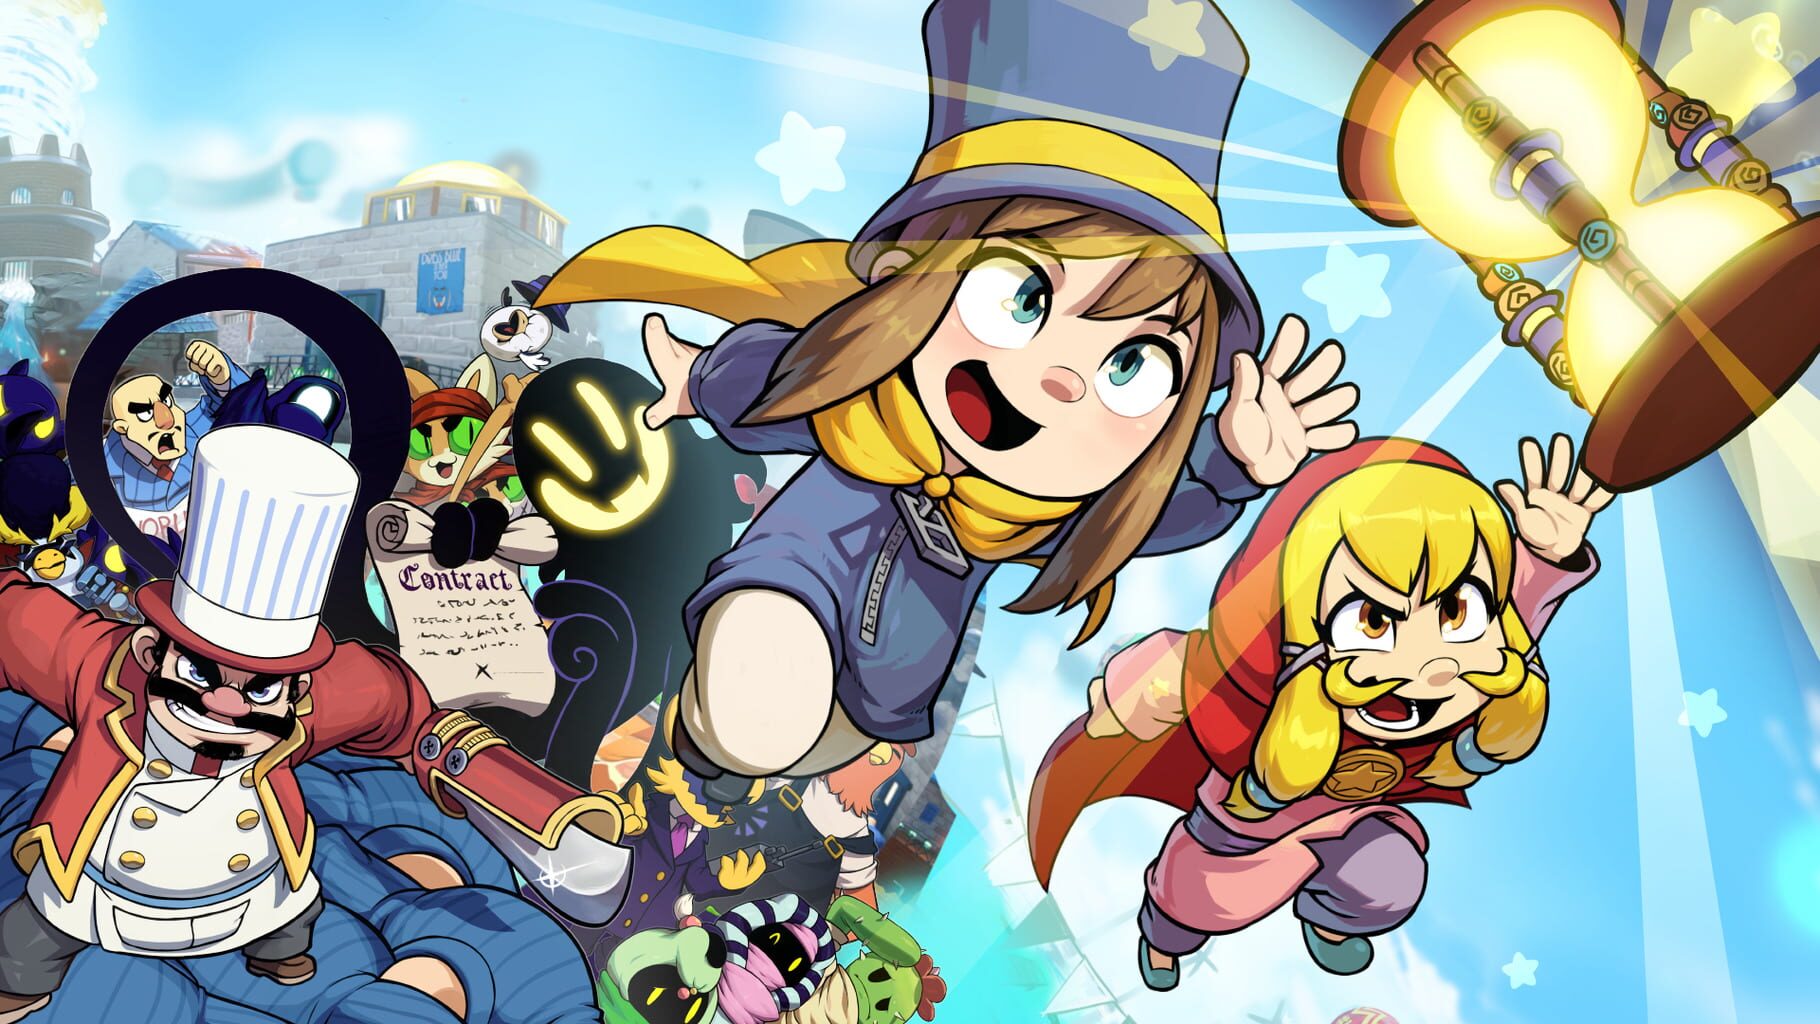 Artwork for A Hat in Time